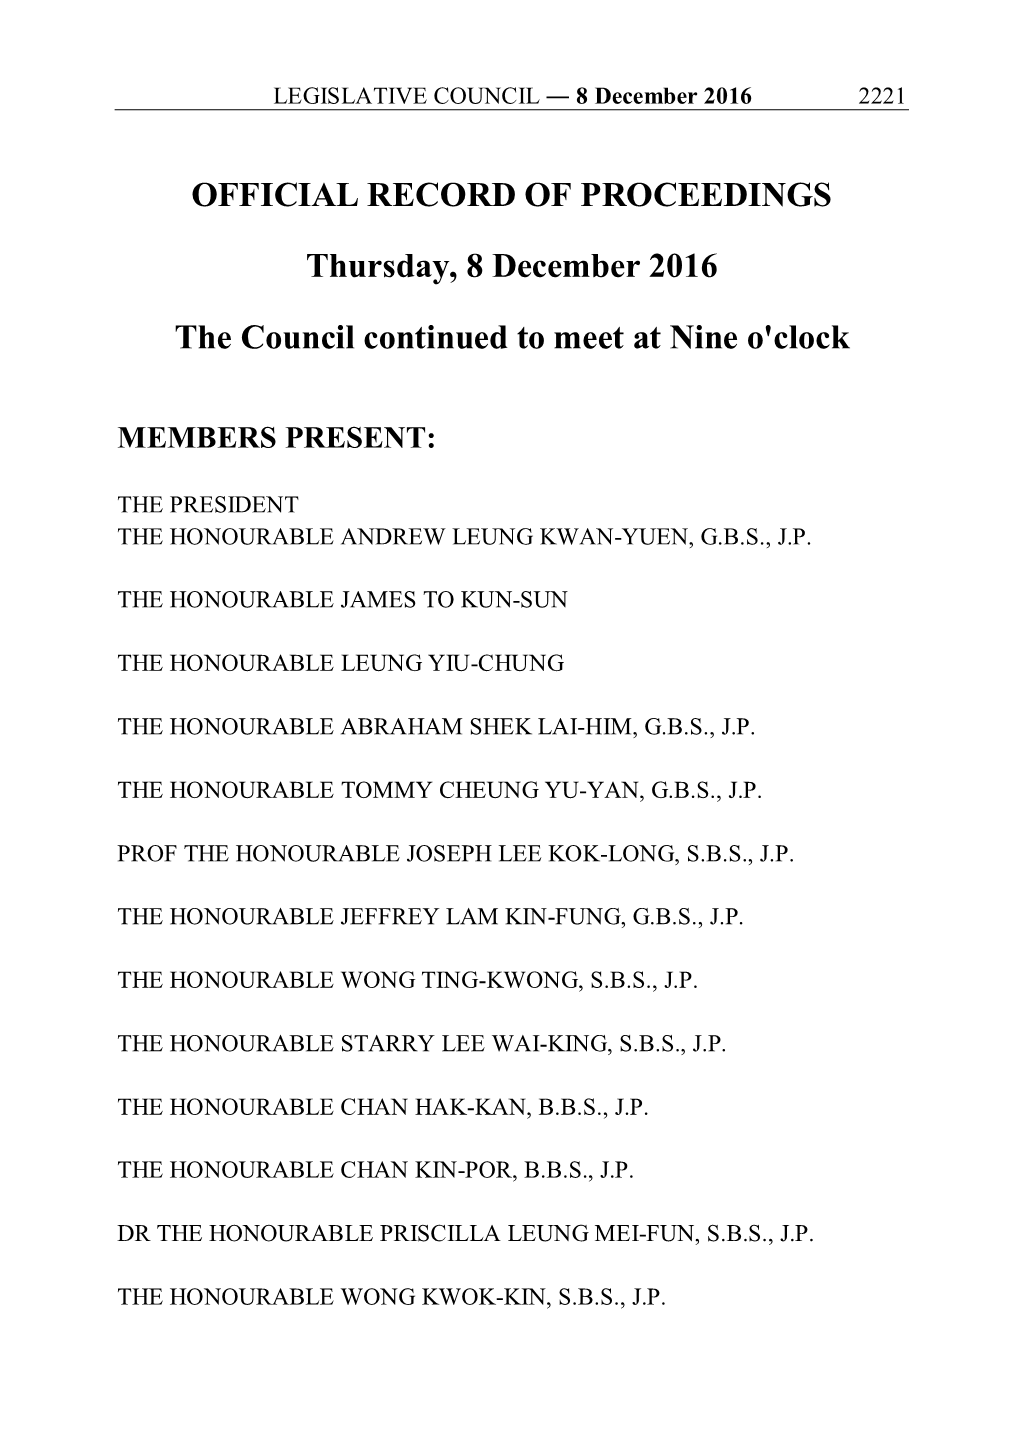 OFFICIAL RECORD of PROCEEDINGS Thursday, 8